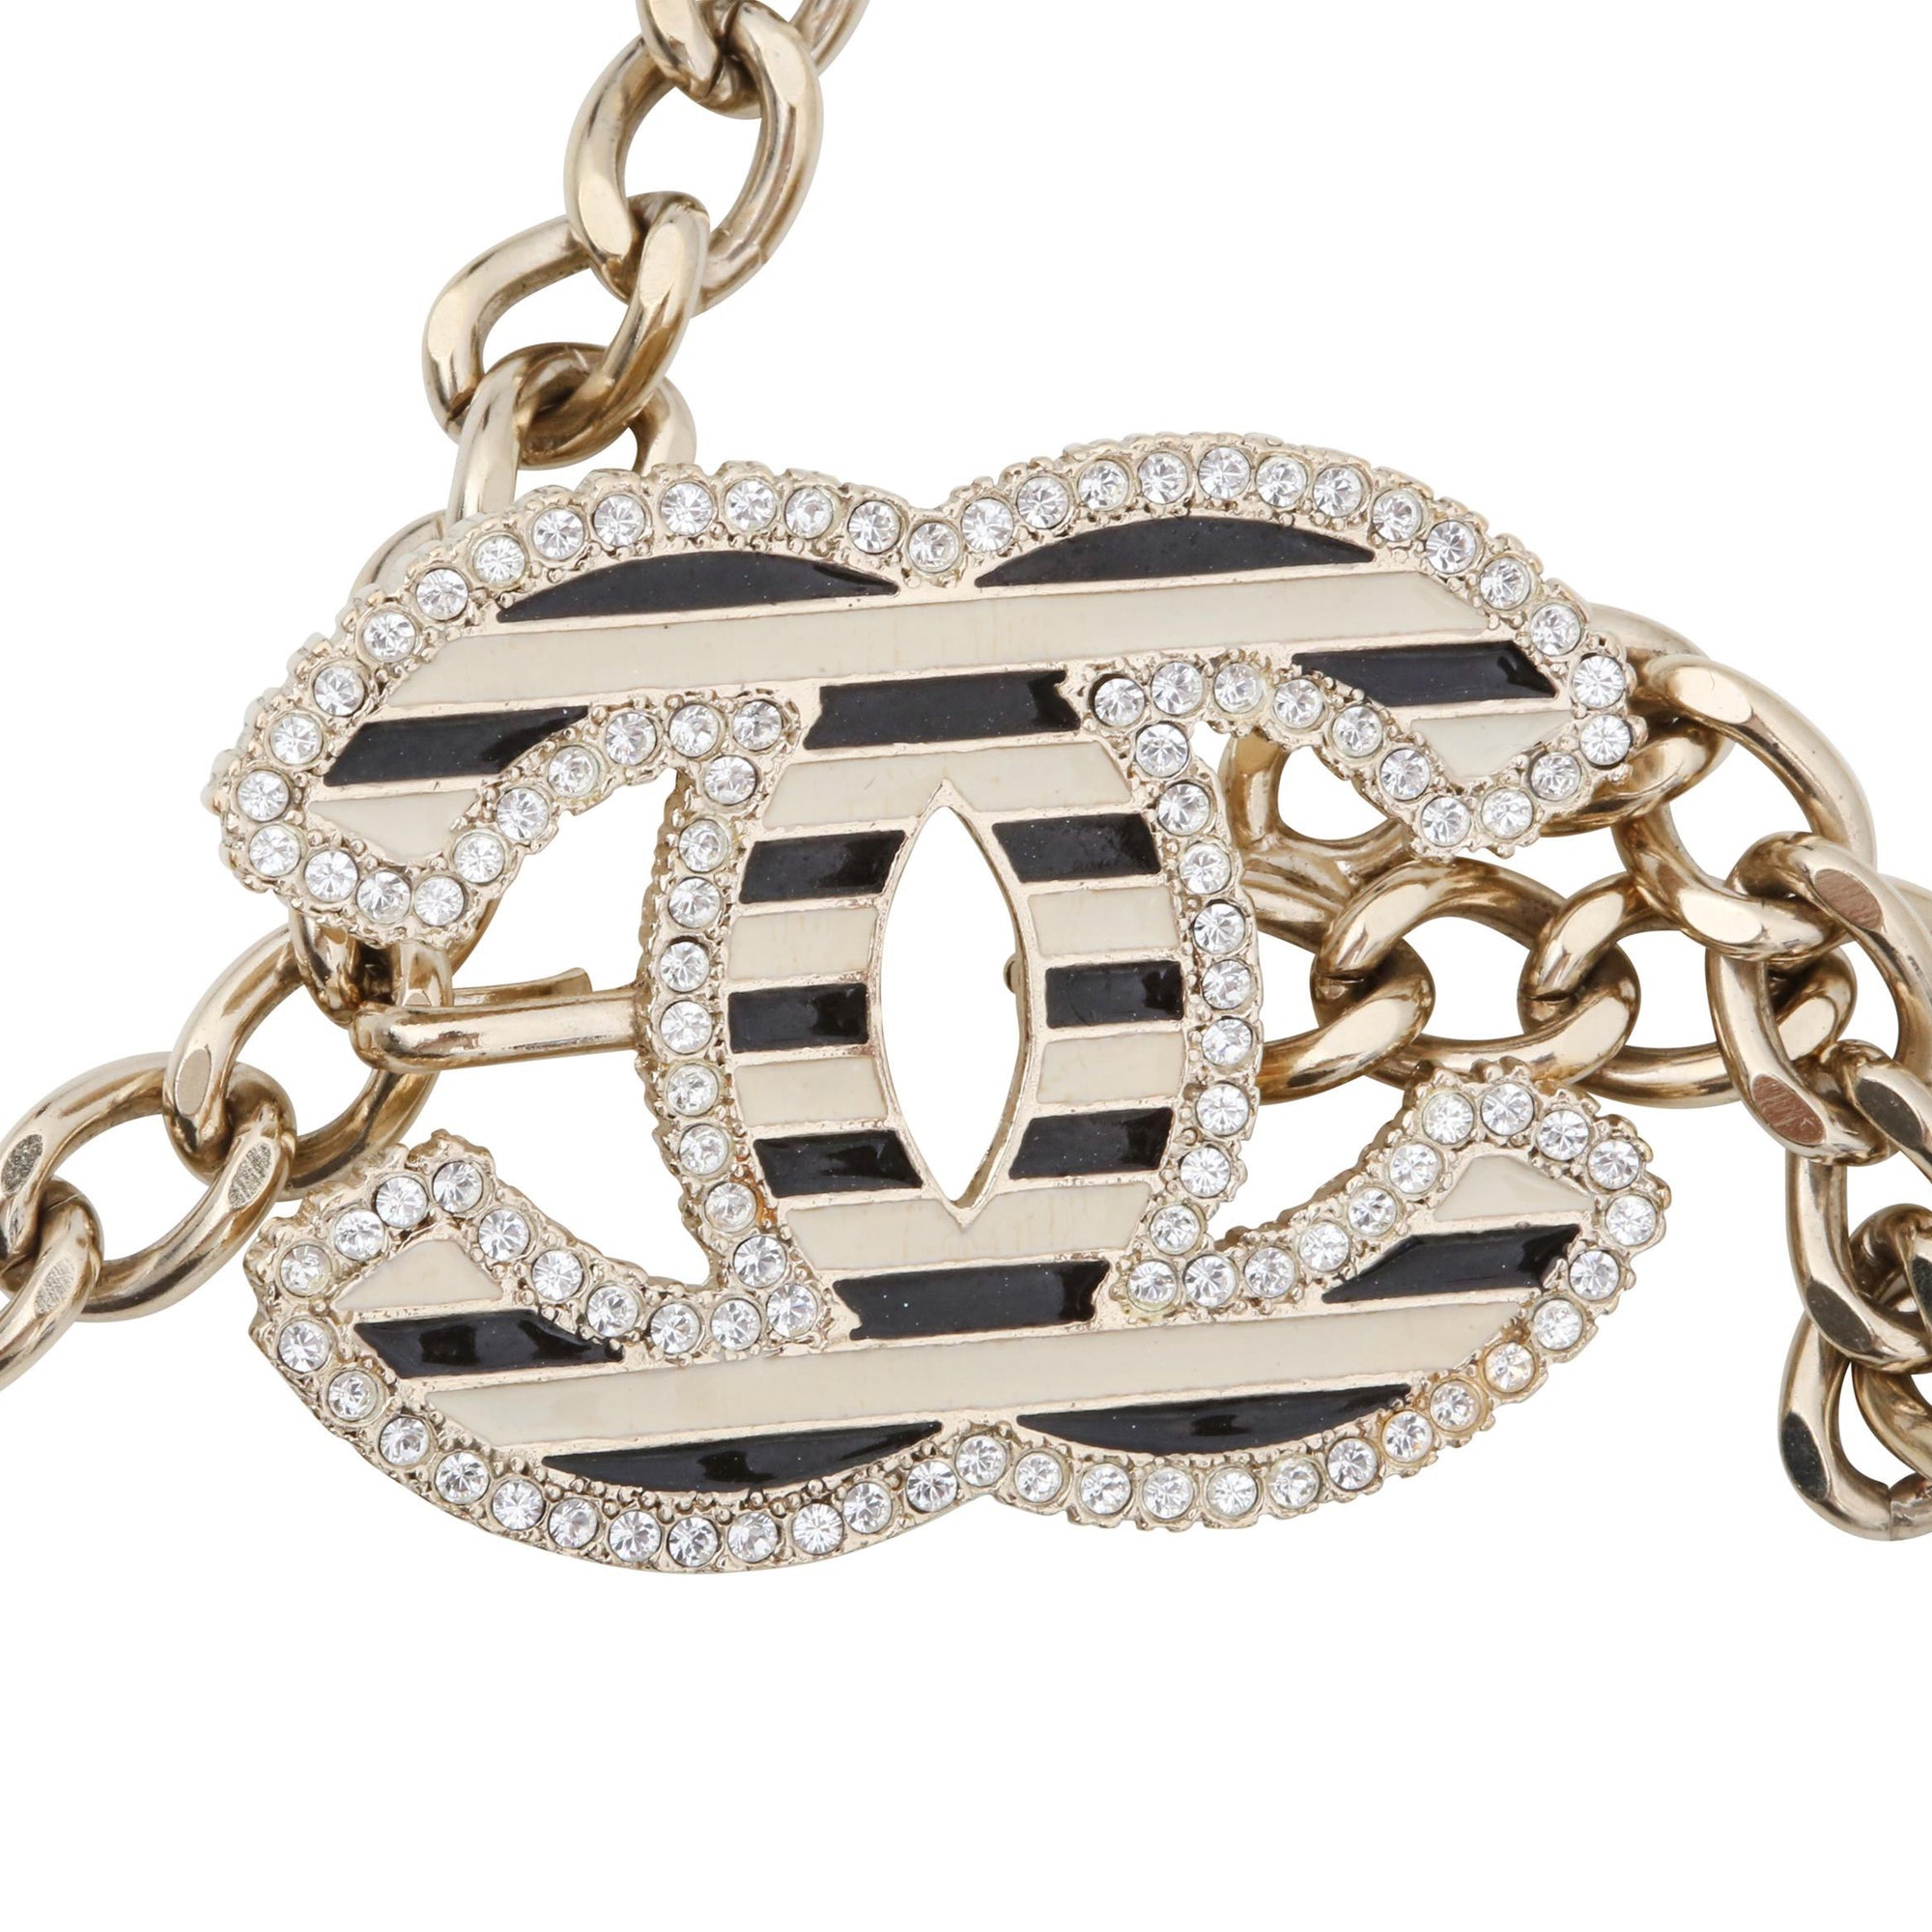 CHANEL, Jewelry, Authentic Chanel Pendant Necklace